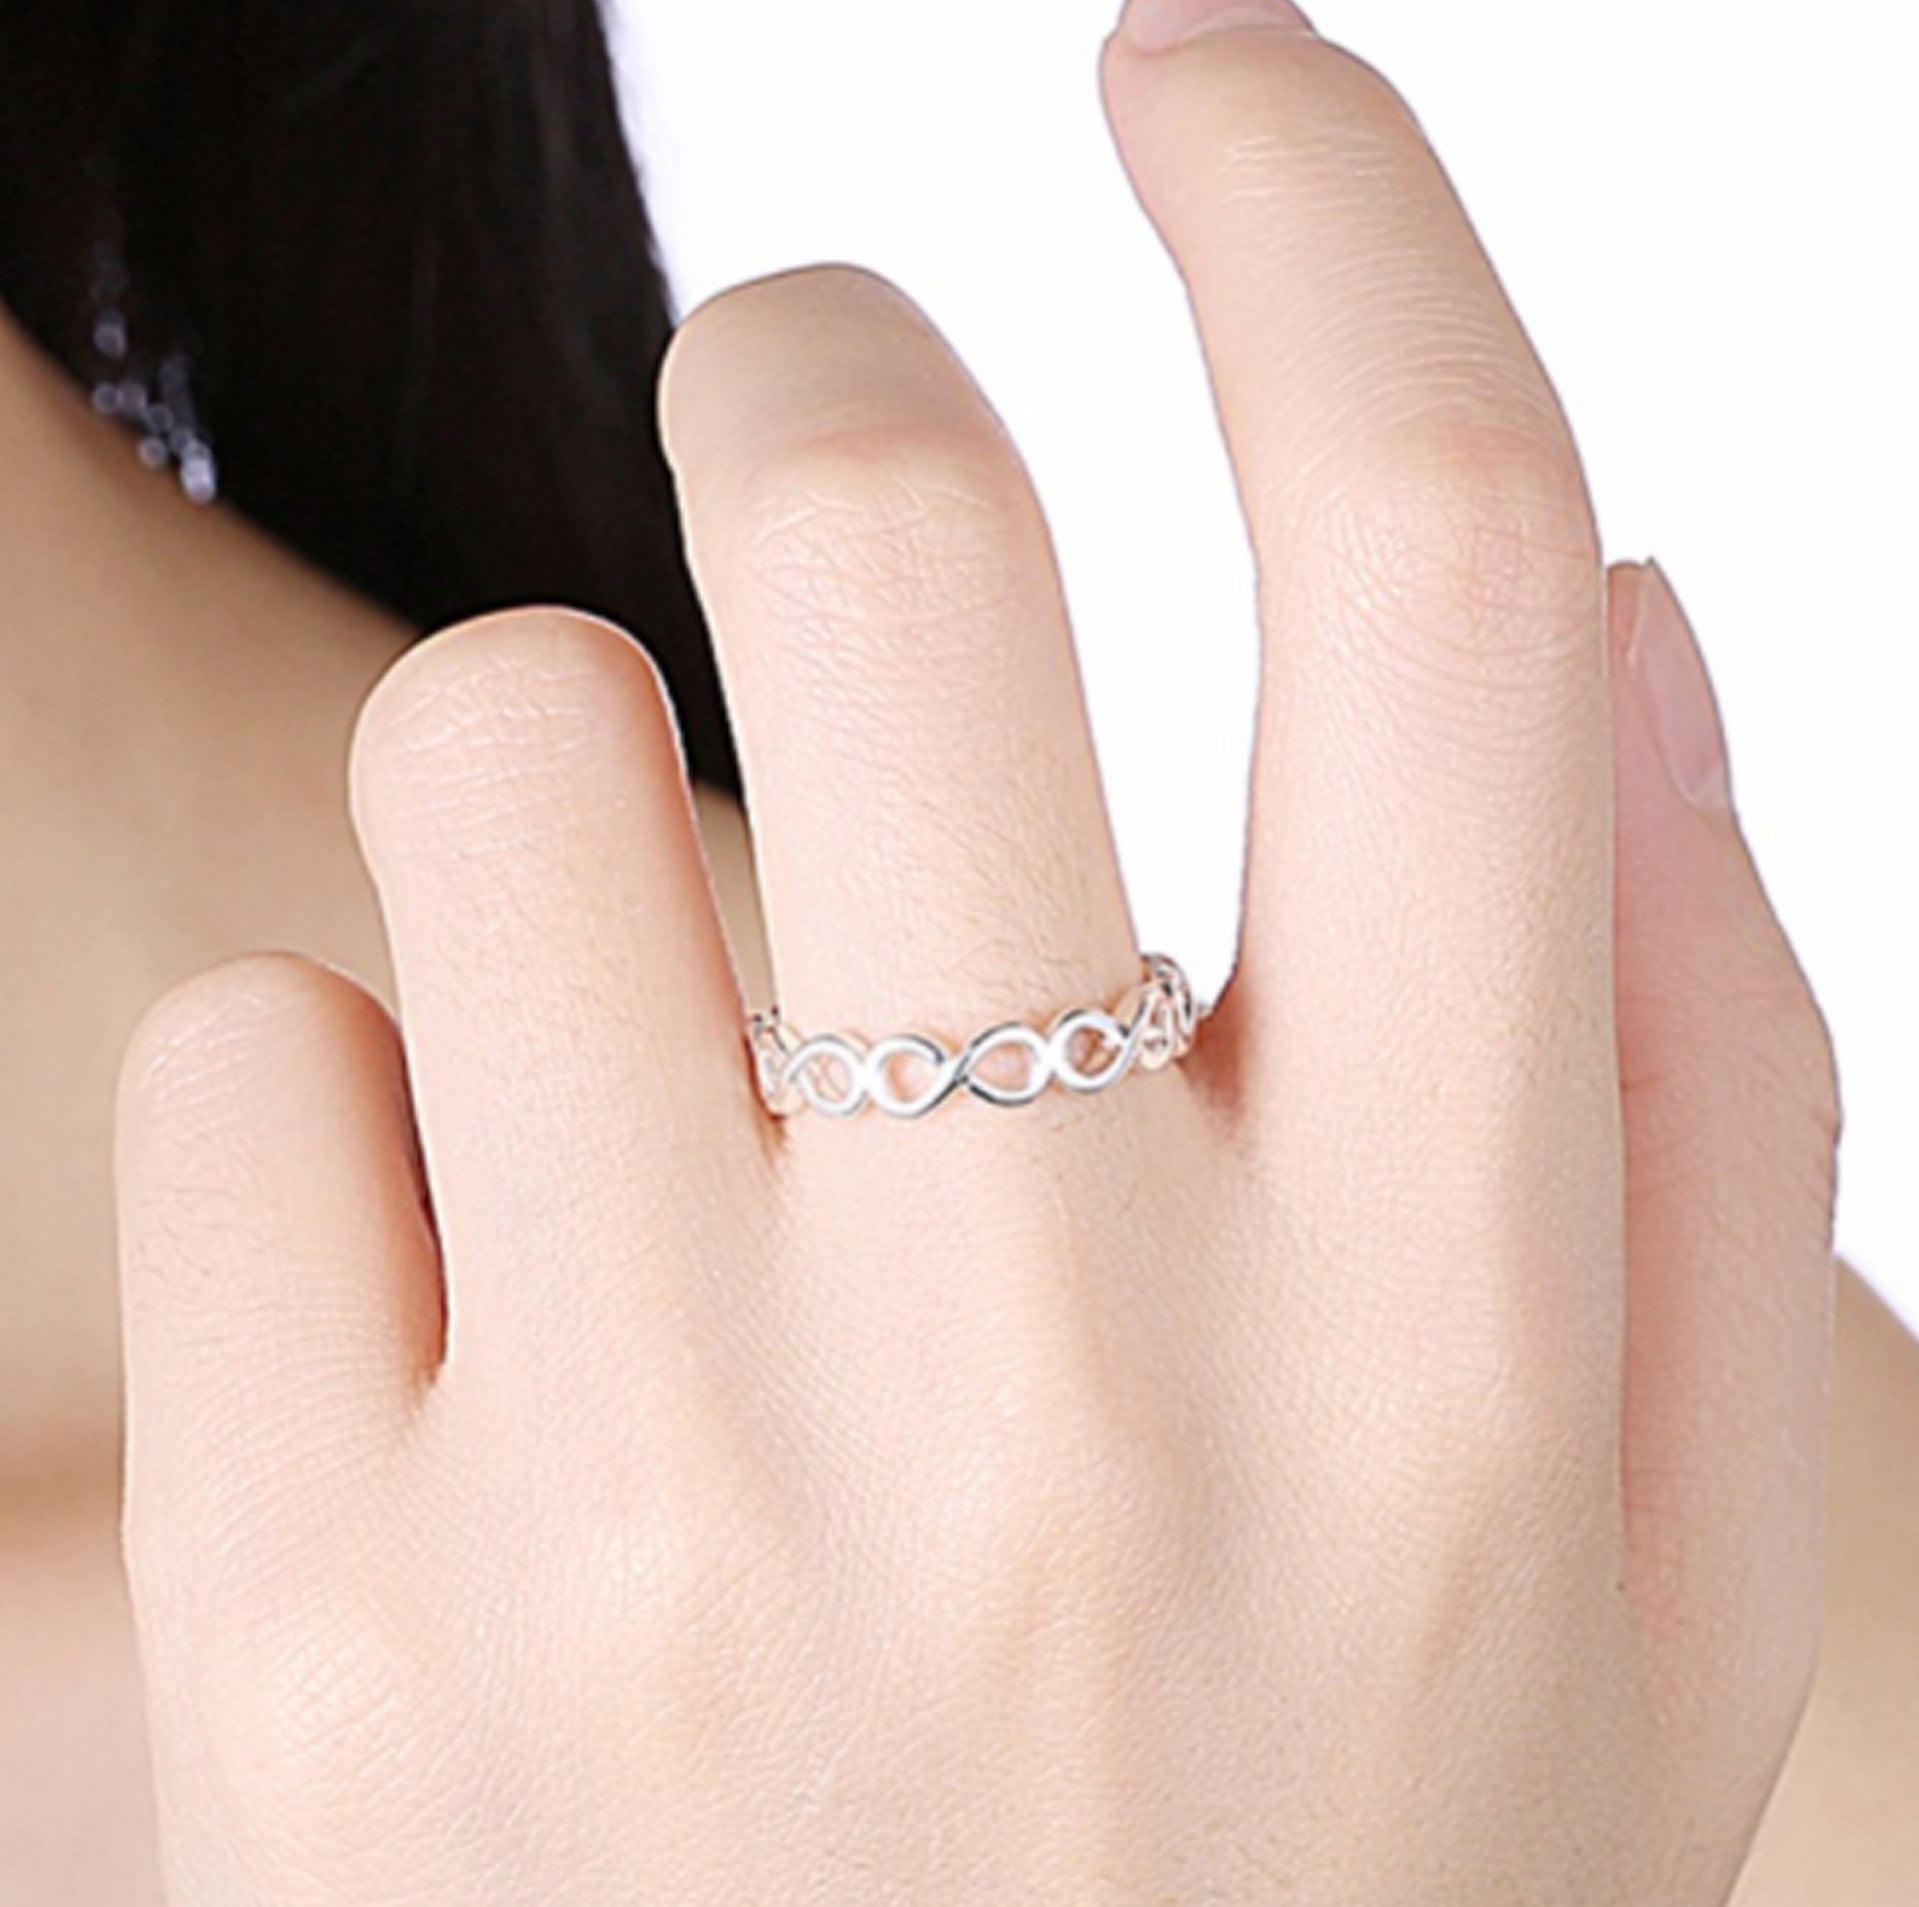 Silver Infinity Band Ring